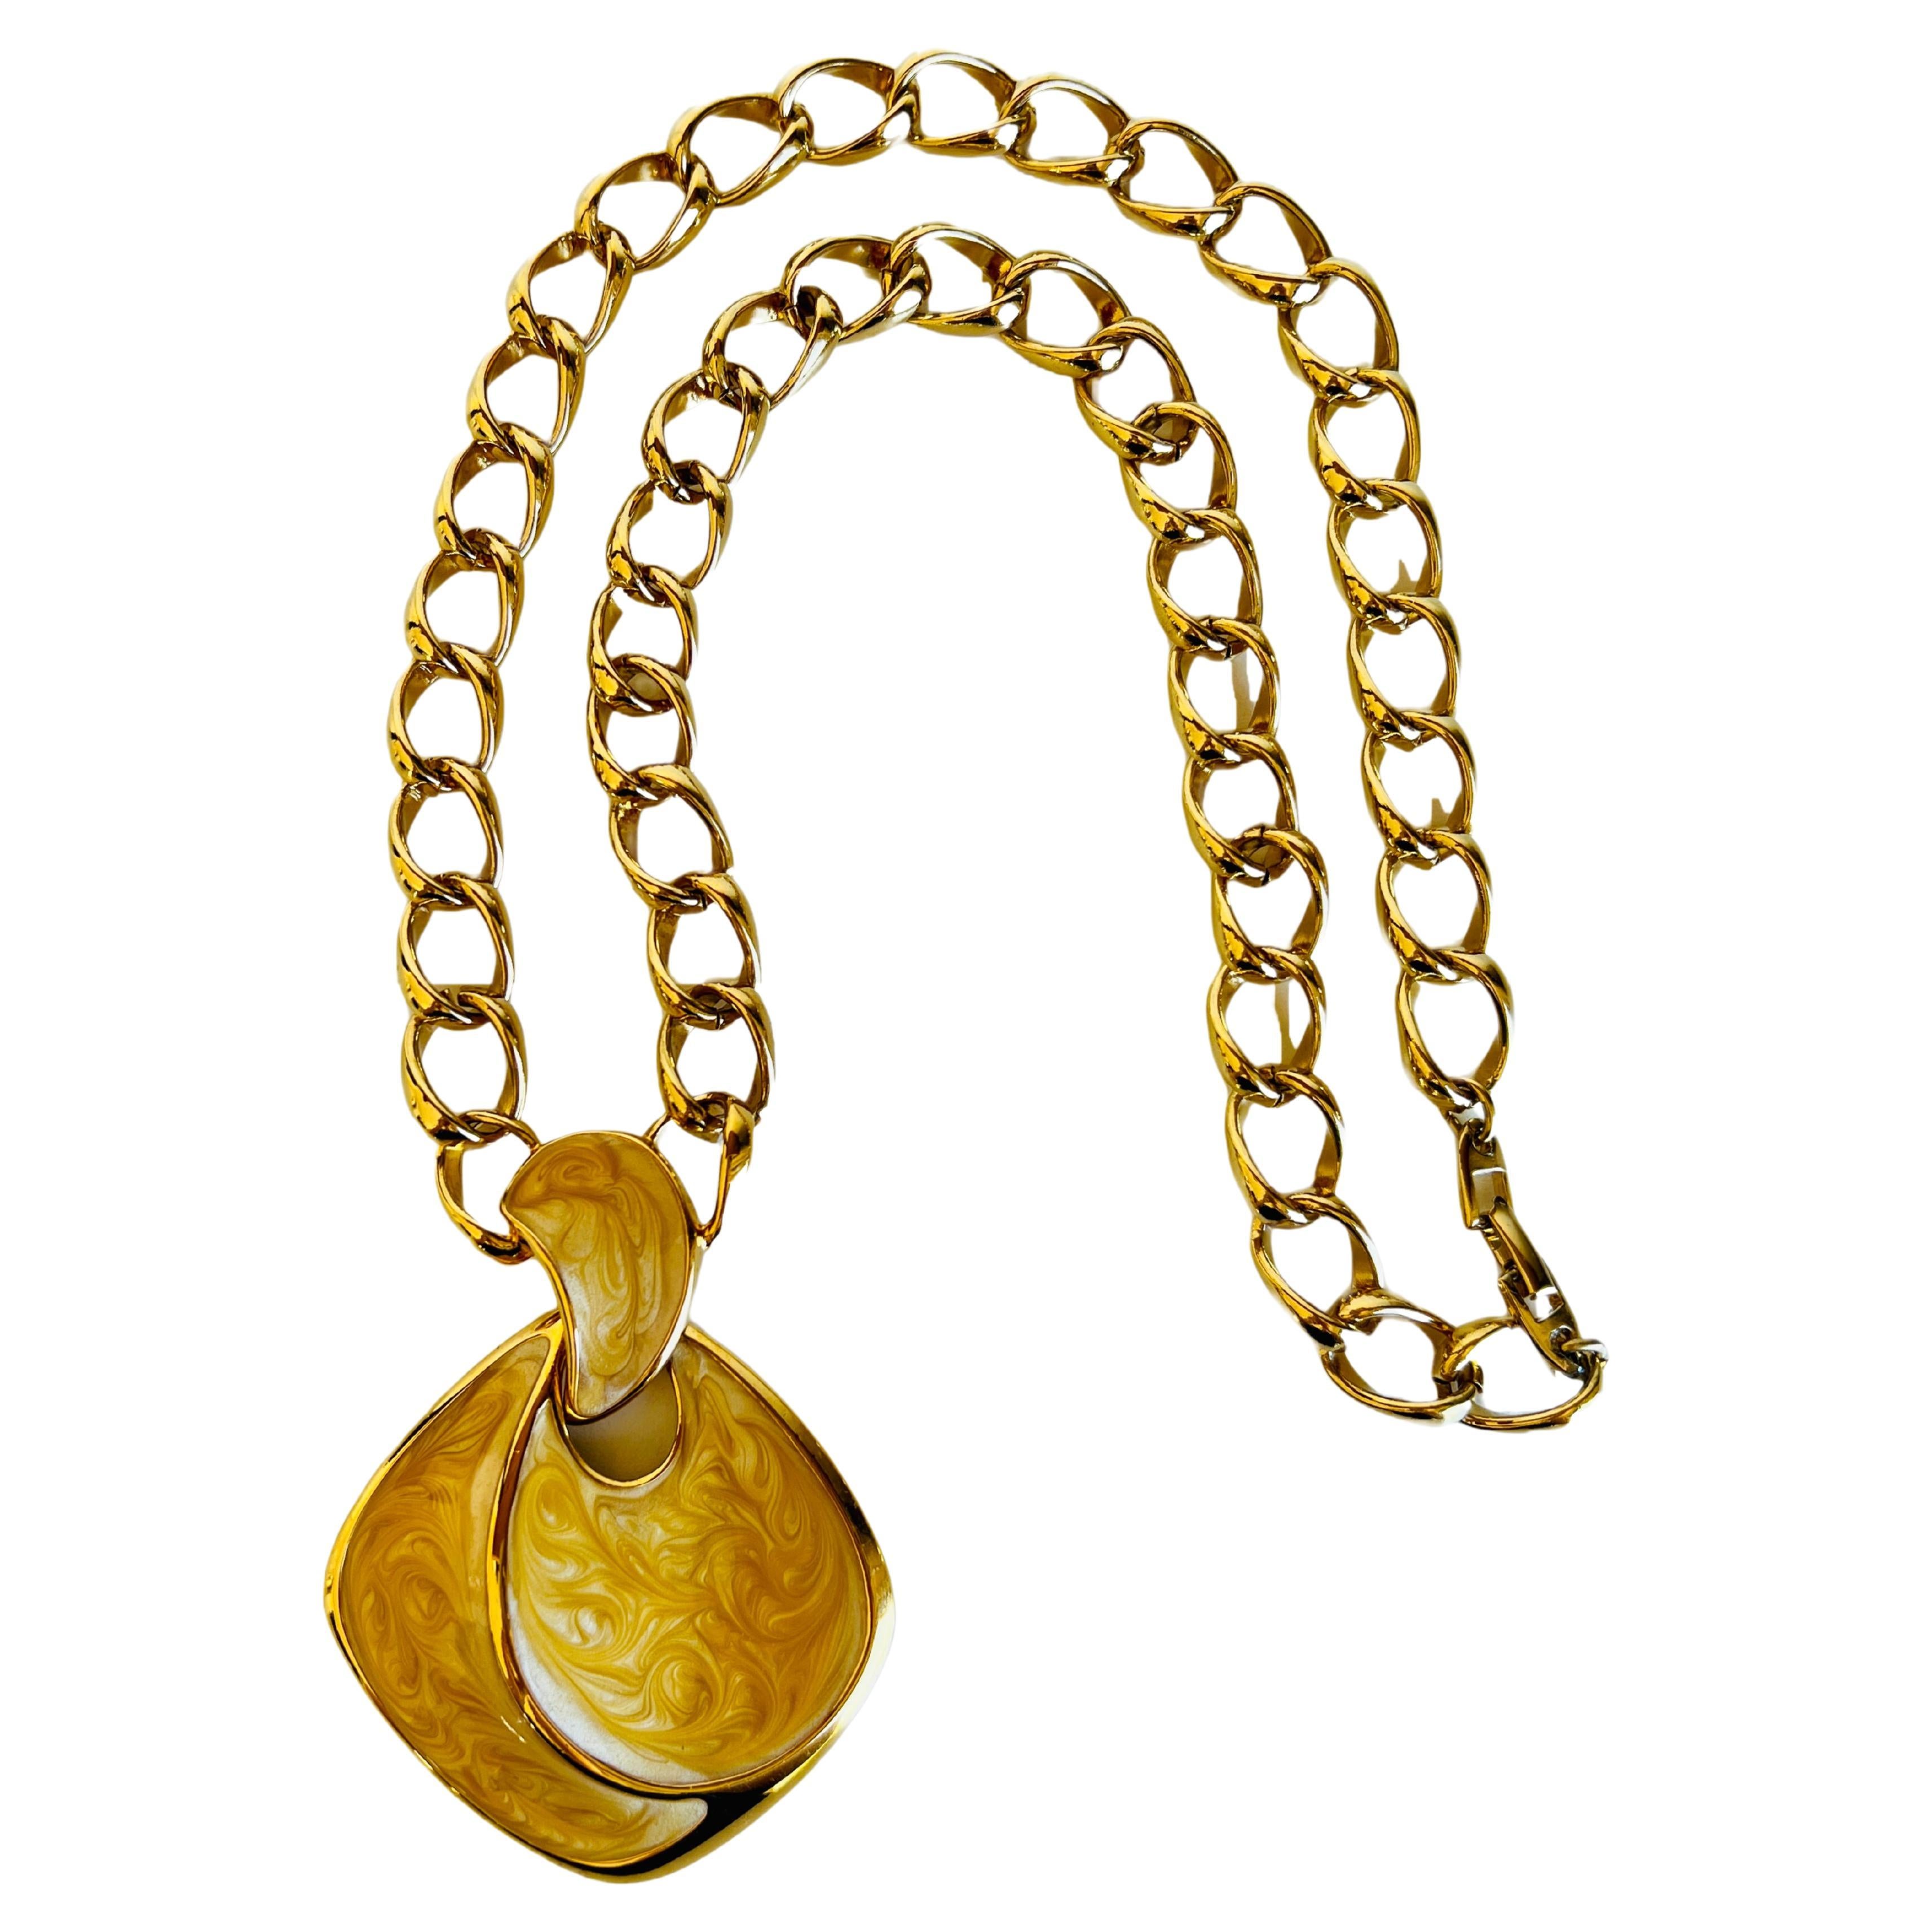 Napier Swirled Enamel Chunky Gold Chain Link Statement Necklace